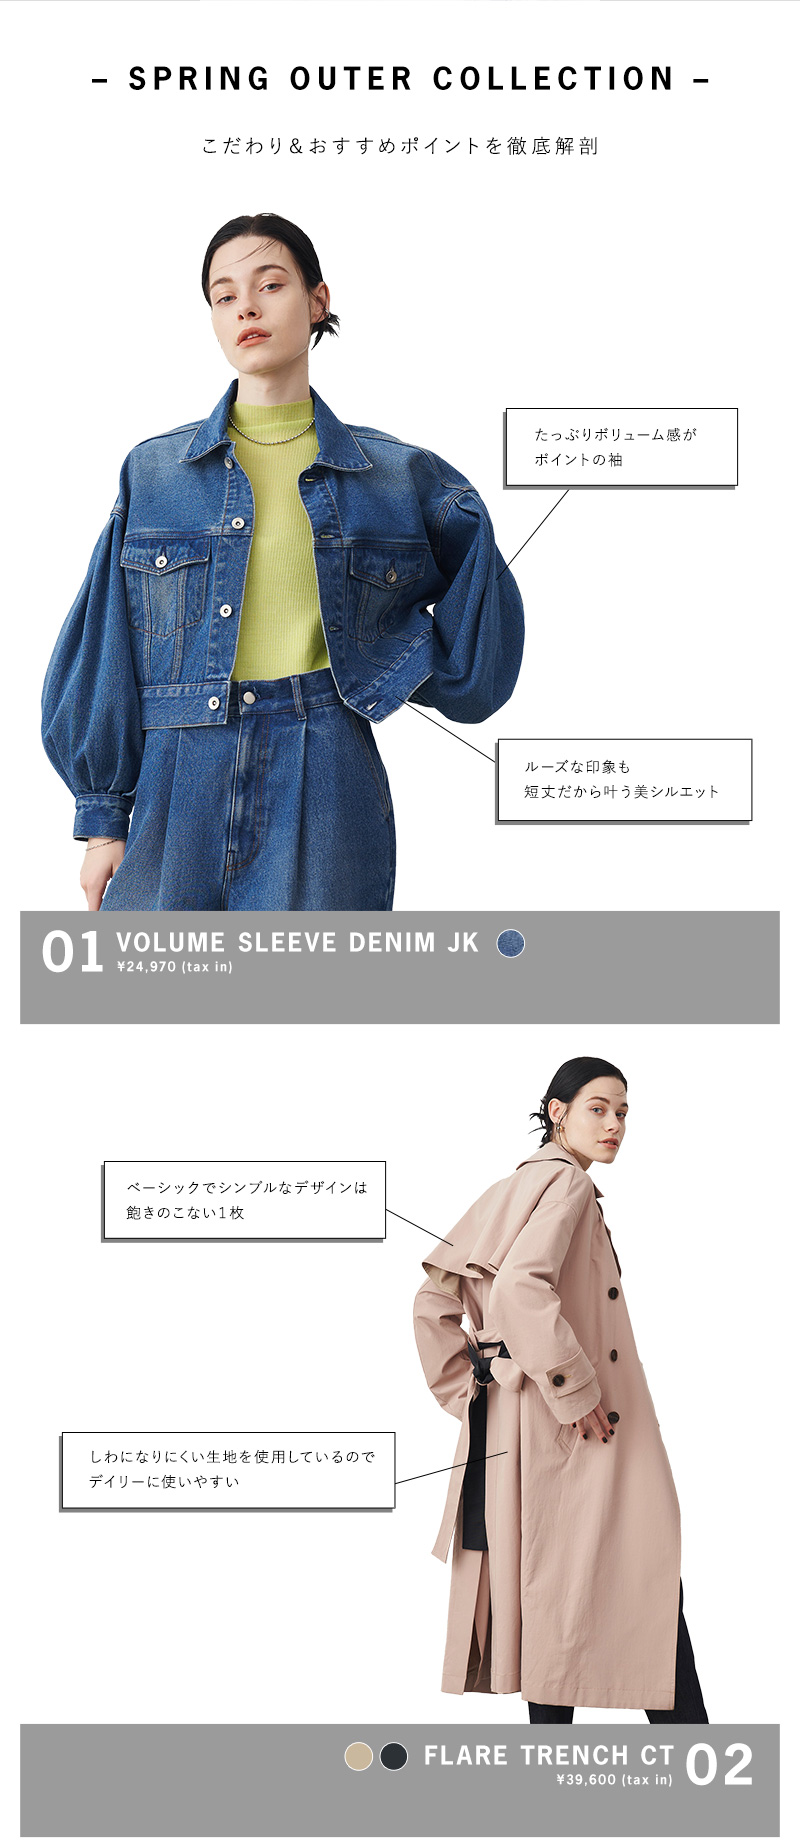 – SPRING OUTER COLLECTION –